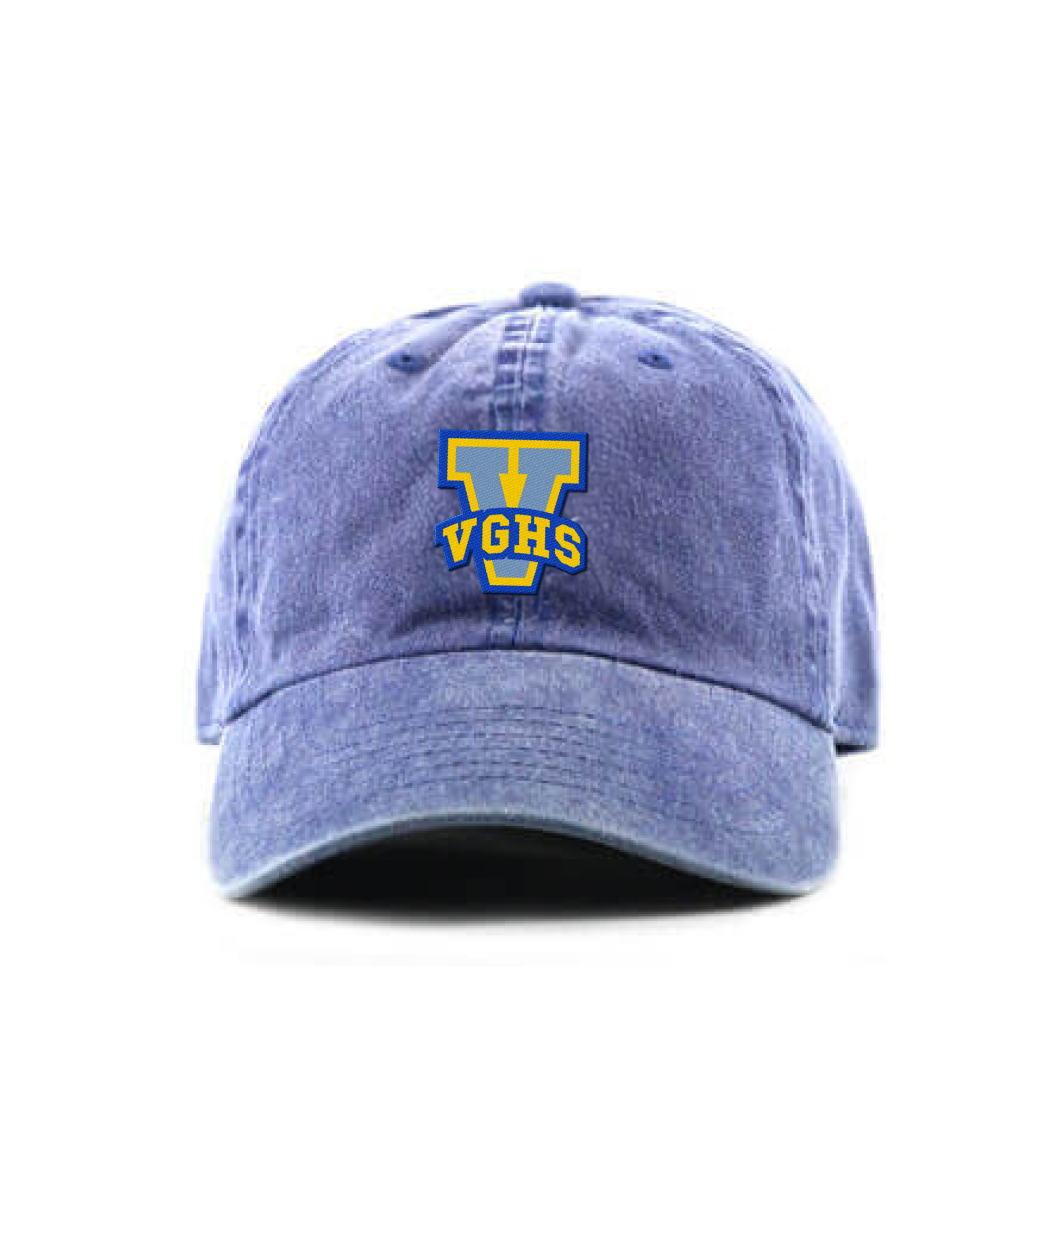 Denim style dad hat with yellow and blue V emblem embroidered in the center with VGHS in smaller letters on top.